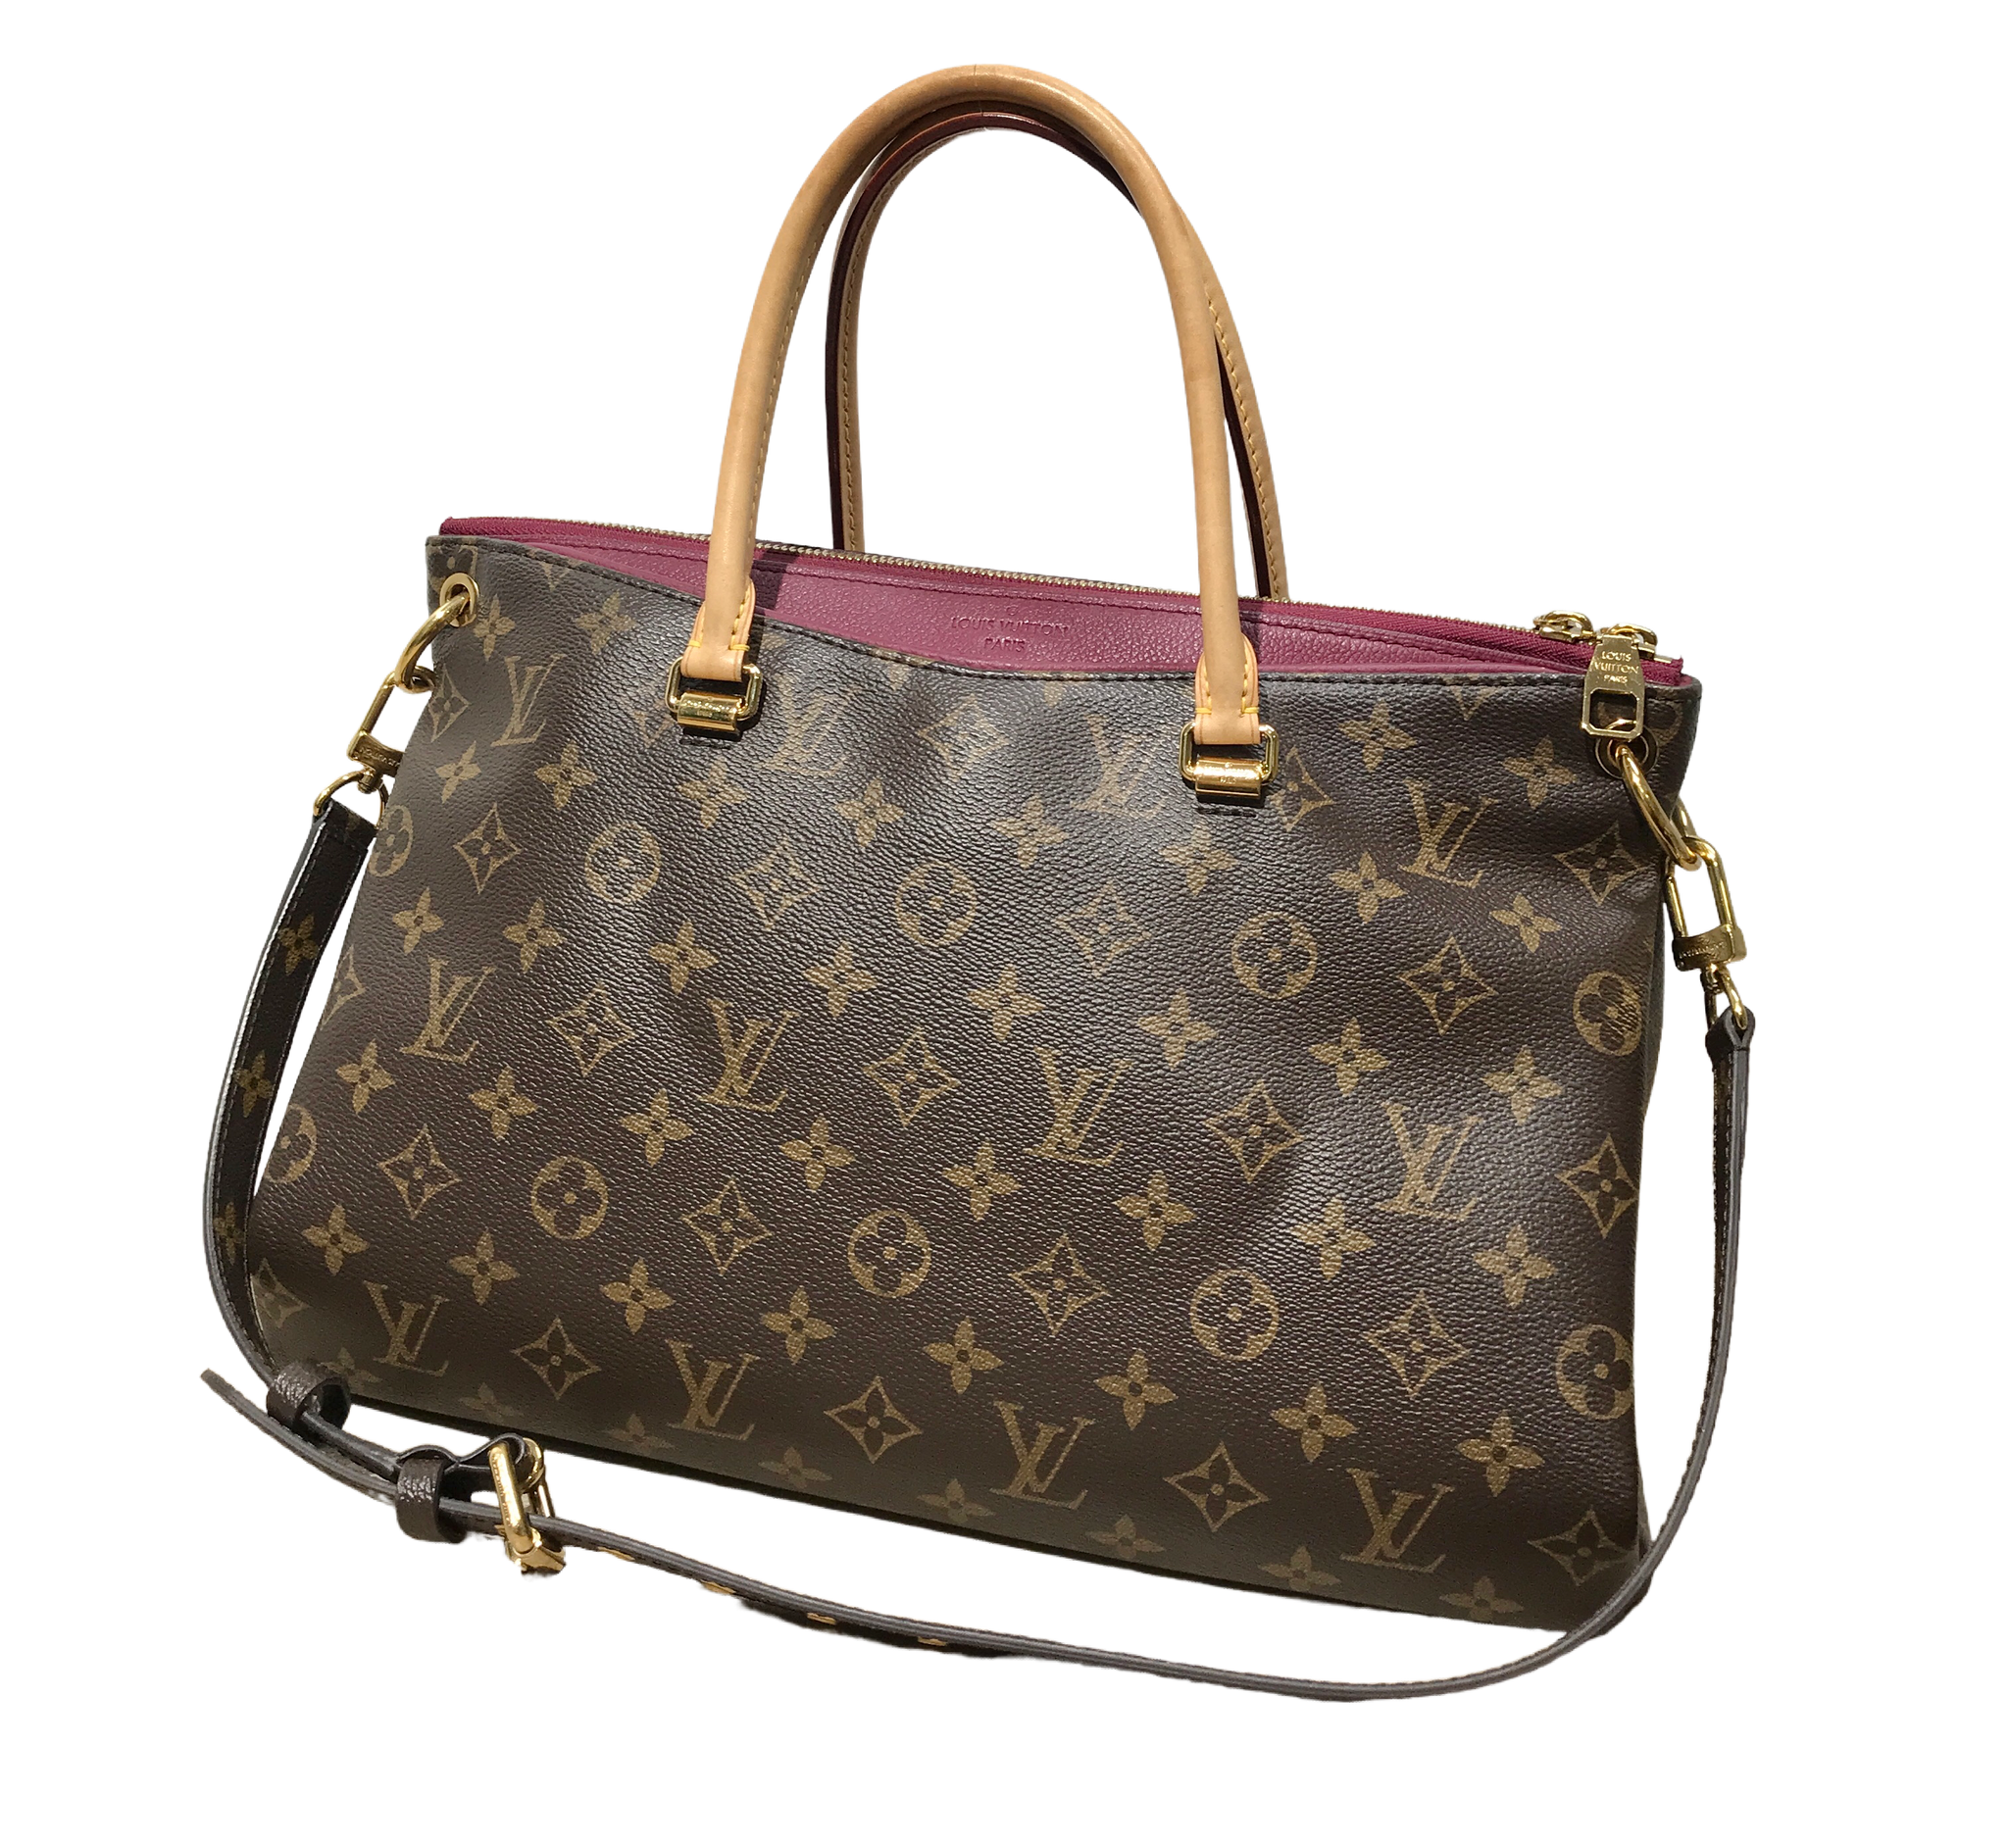 Louis Vuitton - Authenticated Metis Handbag - Leather Purple for Women, Very Good Condition